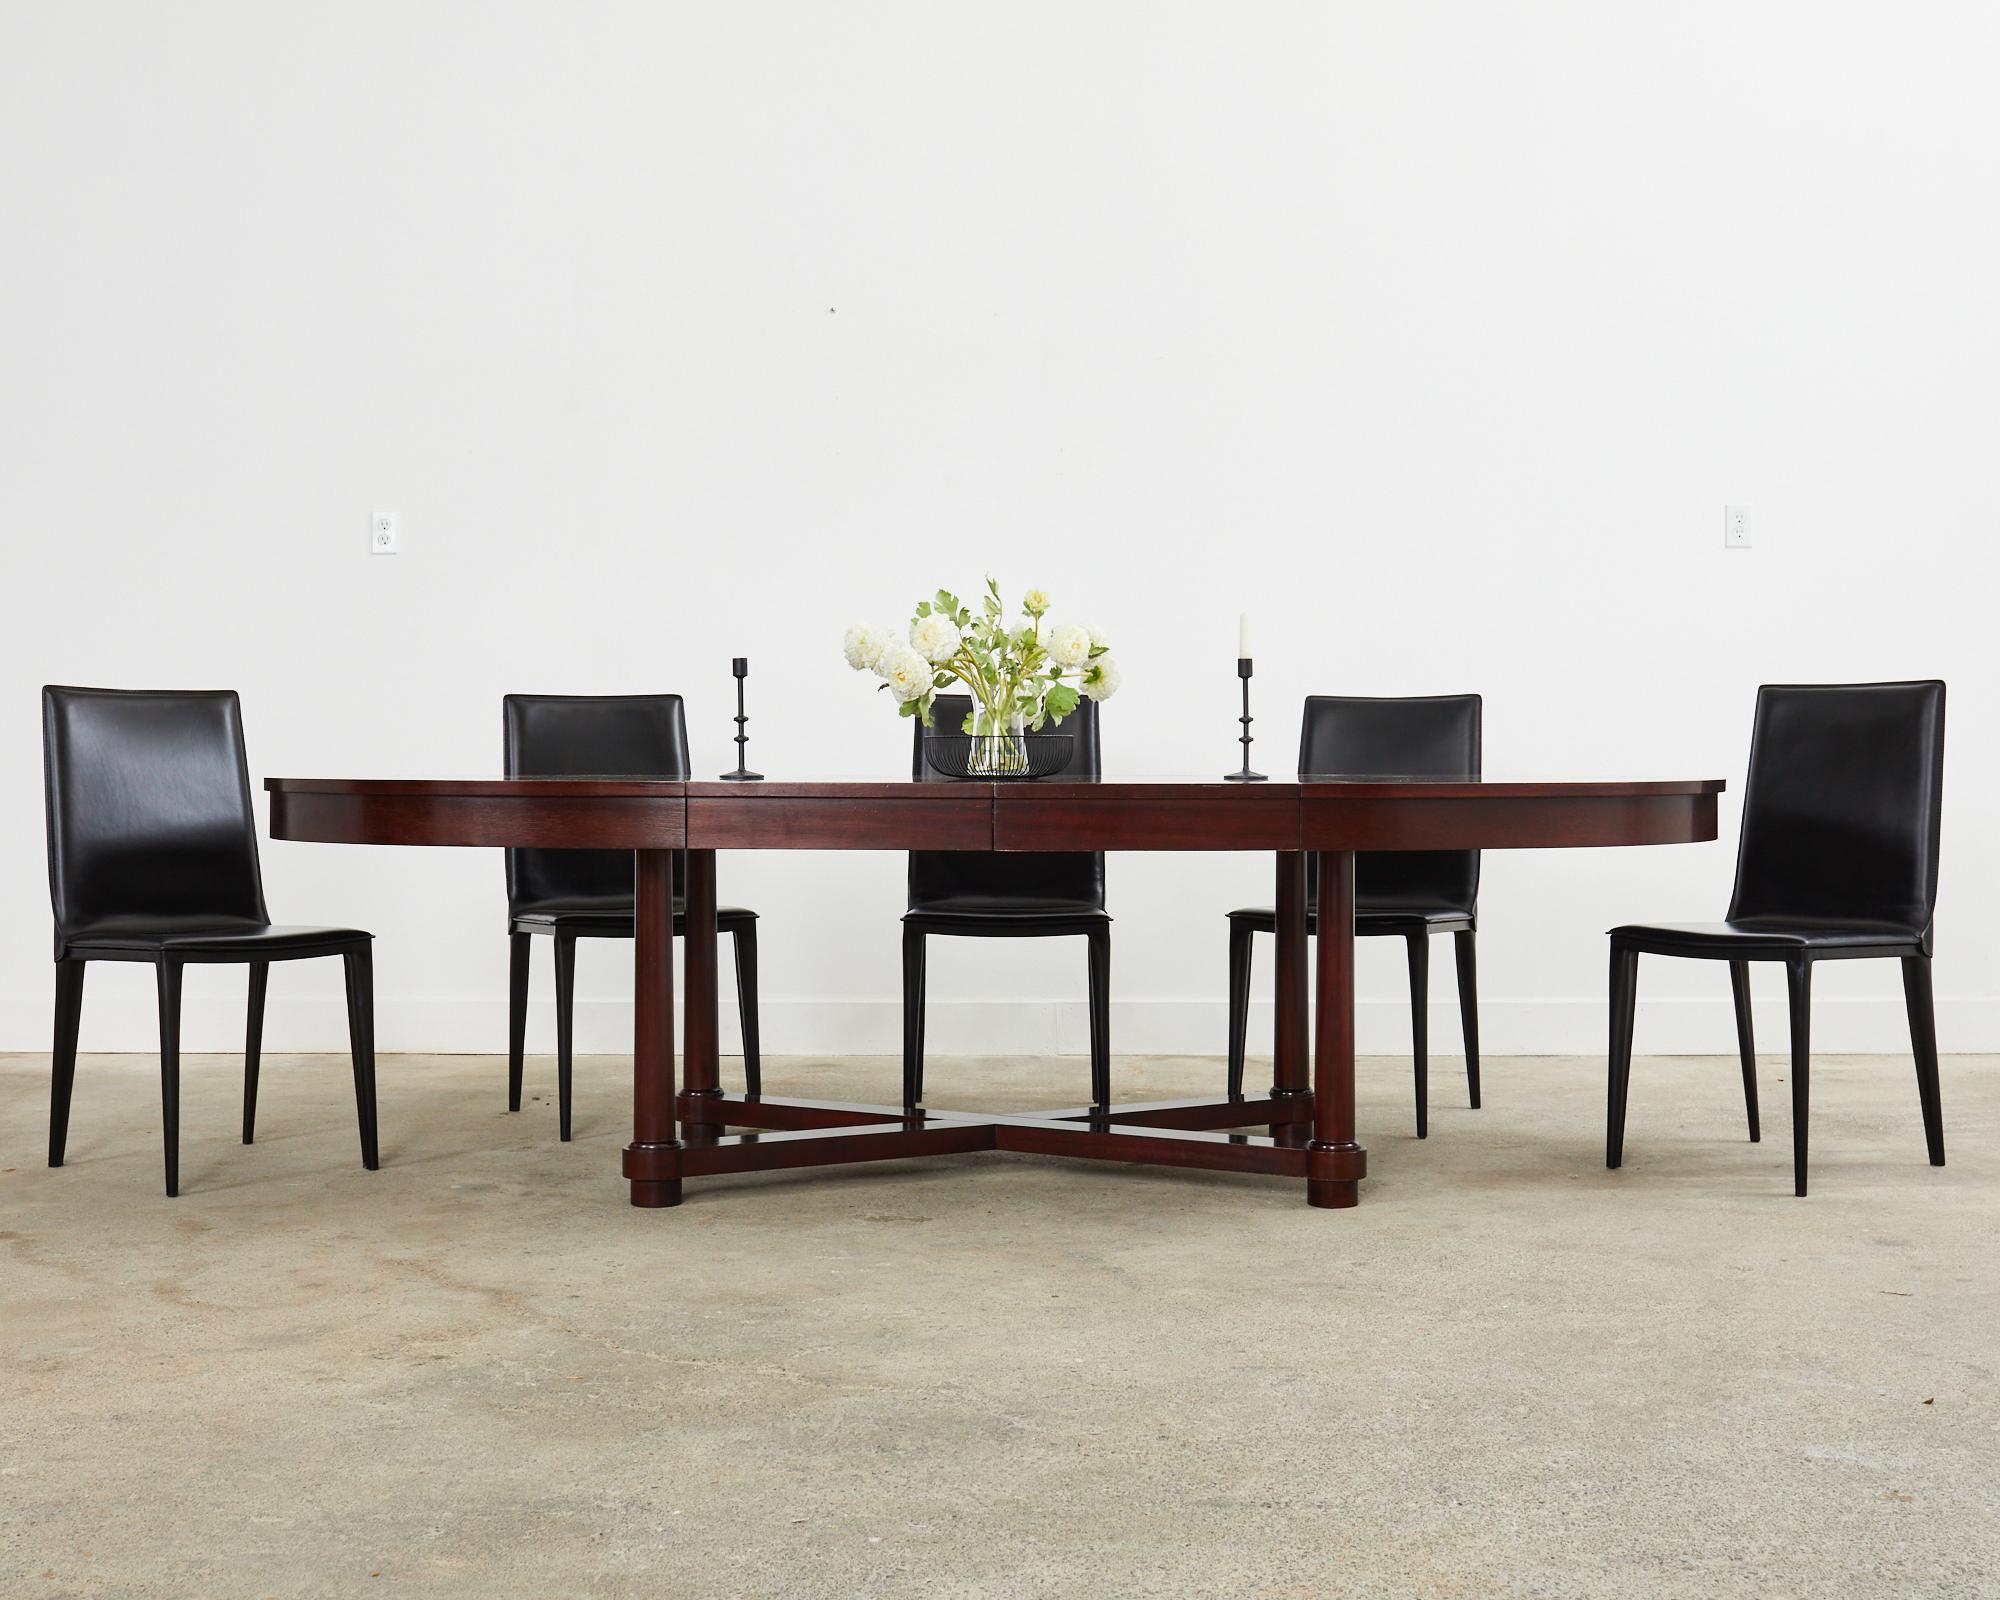 Dramatic set of eight black stitched leather dining chairs made in the manner and style of Mario Bellini. The chairs are designed in Italy by Michele di Fonzo for Frag. Model number 613 known as the Lilly chair features a steel frame completely